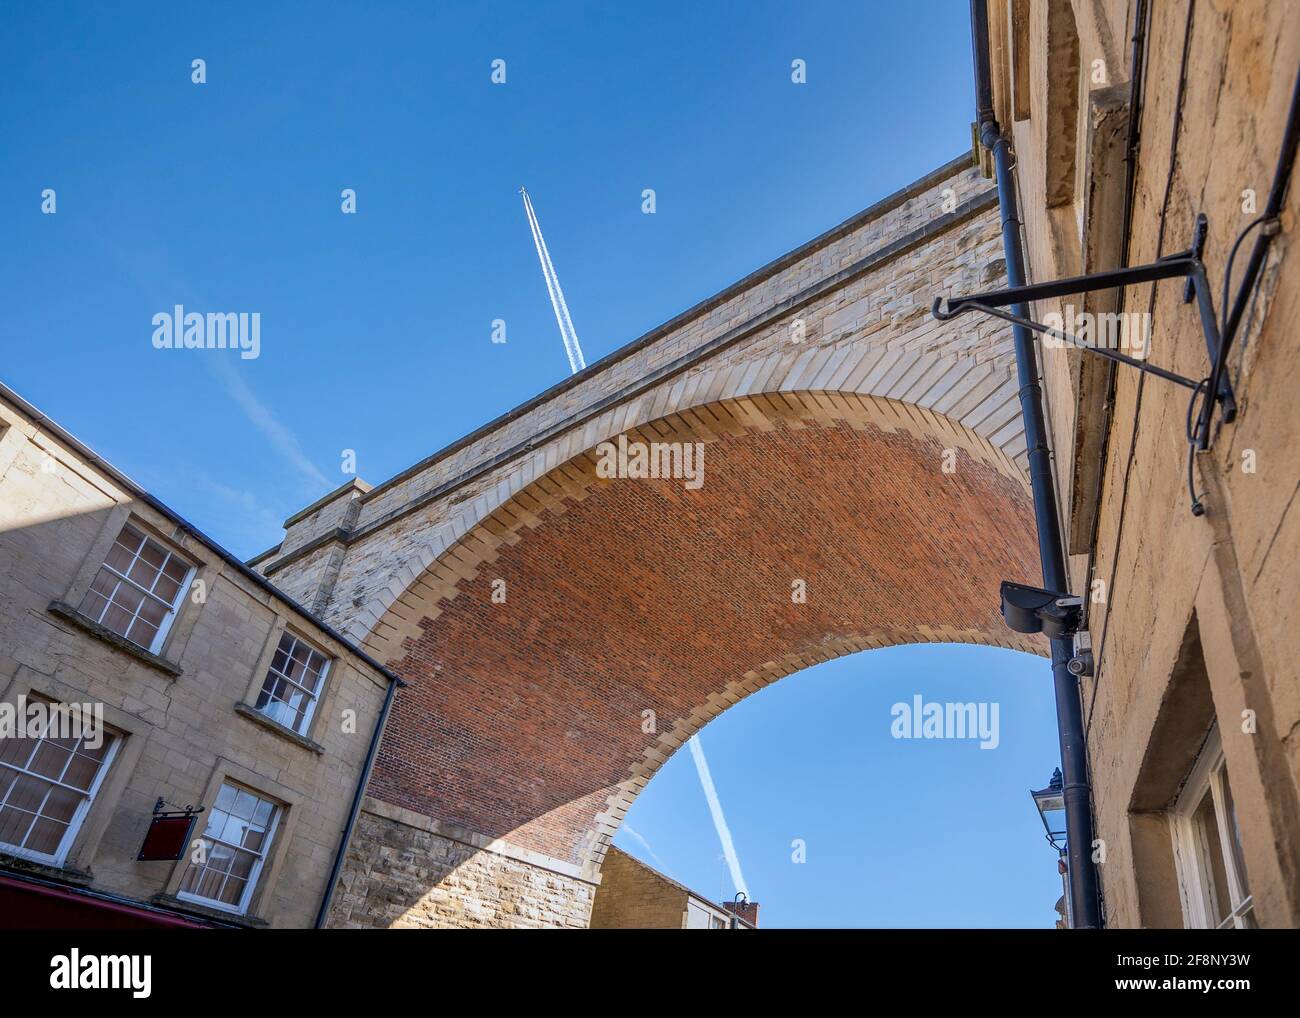 Jumbo jet aeroplane flying over railway bridge arch viaduct in blue sky with vapour trails. Low angle aircraft high in the sky looking up under old Stock Photo